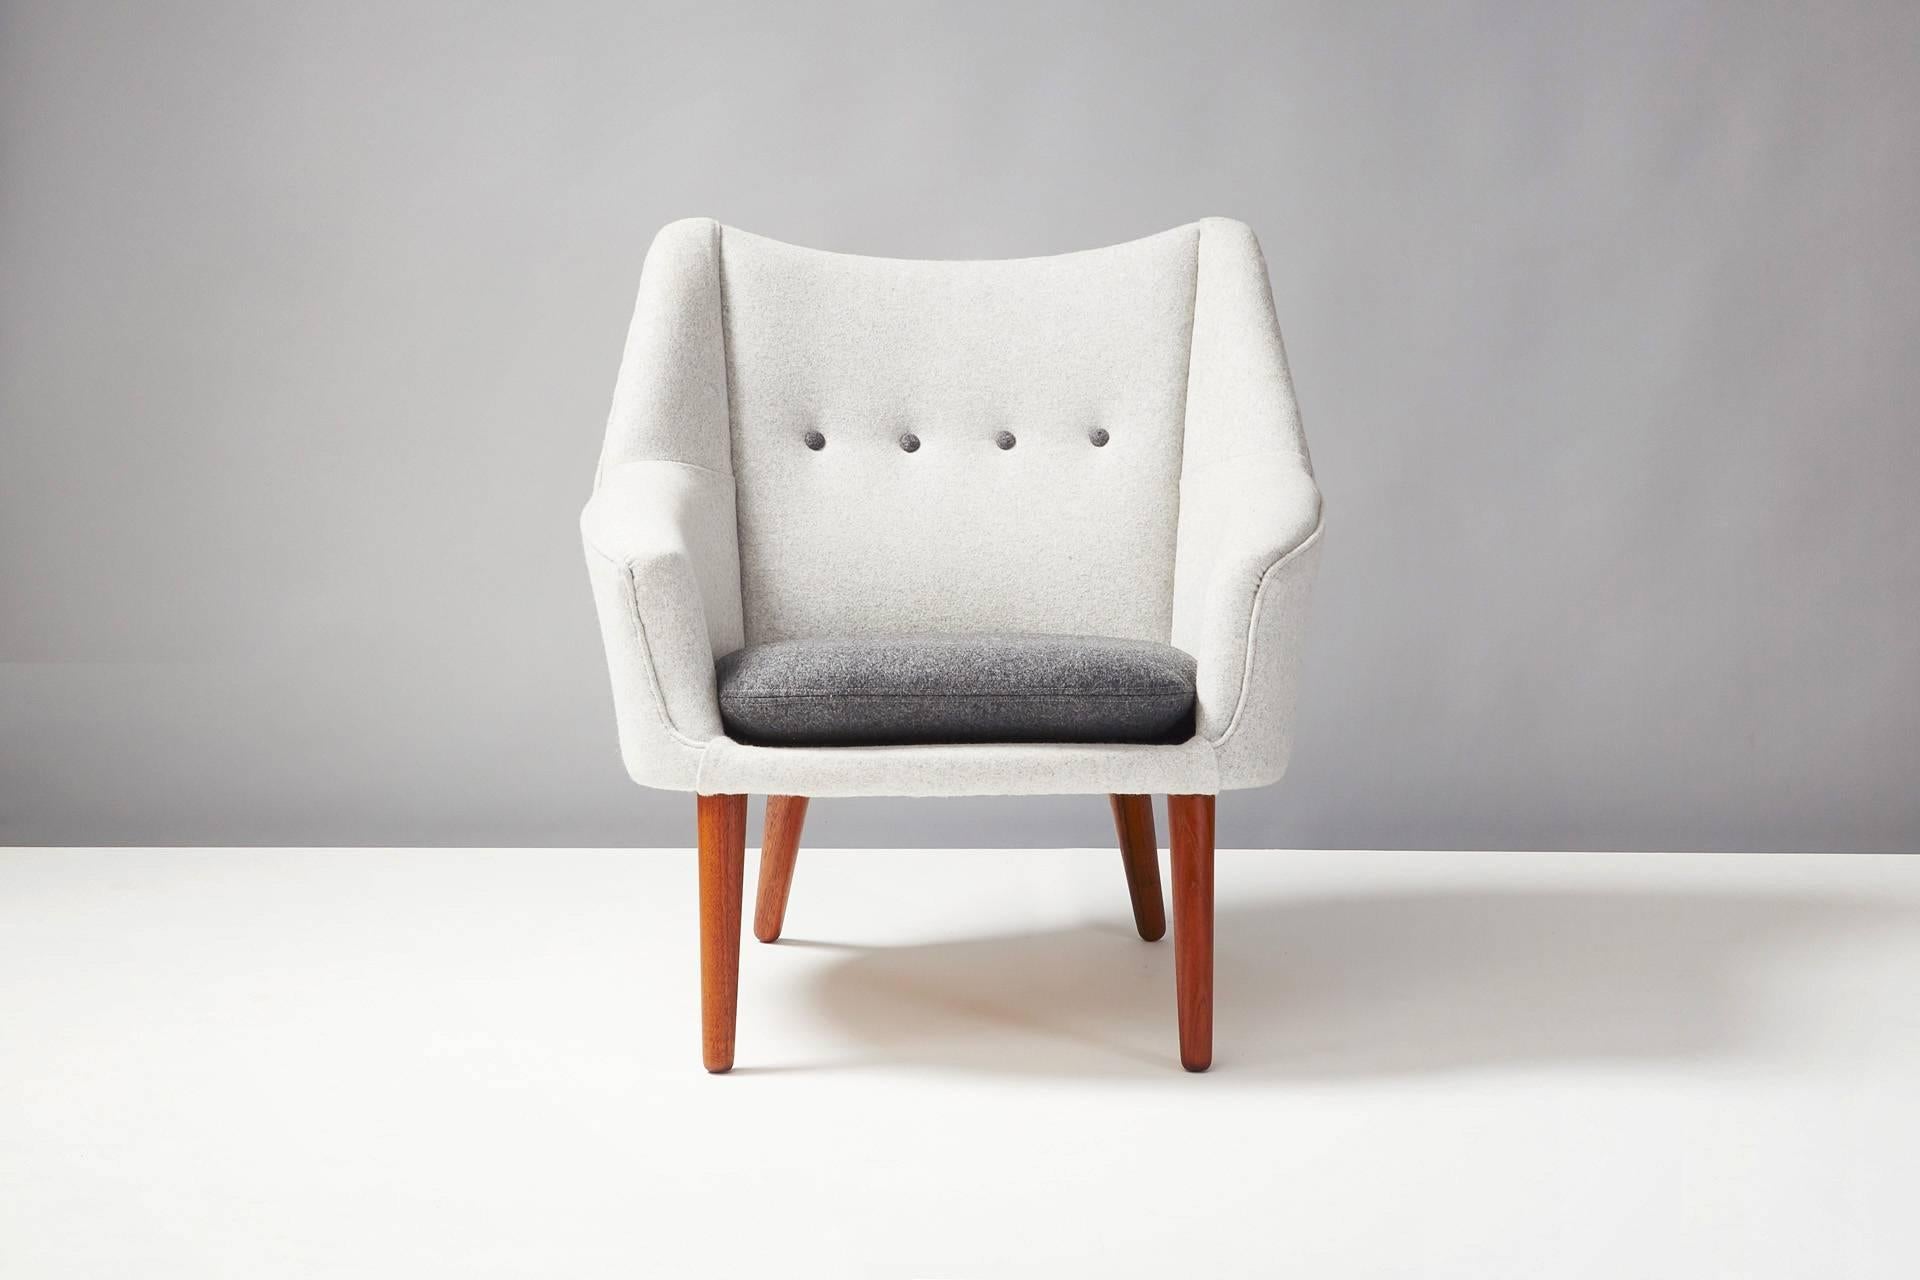 Produced by Rolschau Mobler, Denmark. Teak legs, seat and loose cushion reupholstered in Kvadrat Divina wool fabric.